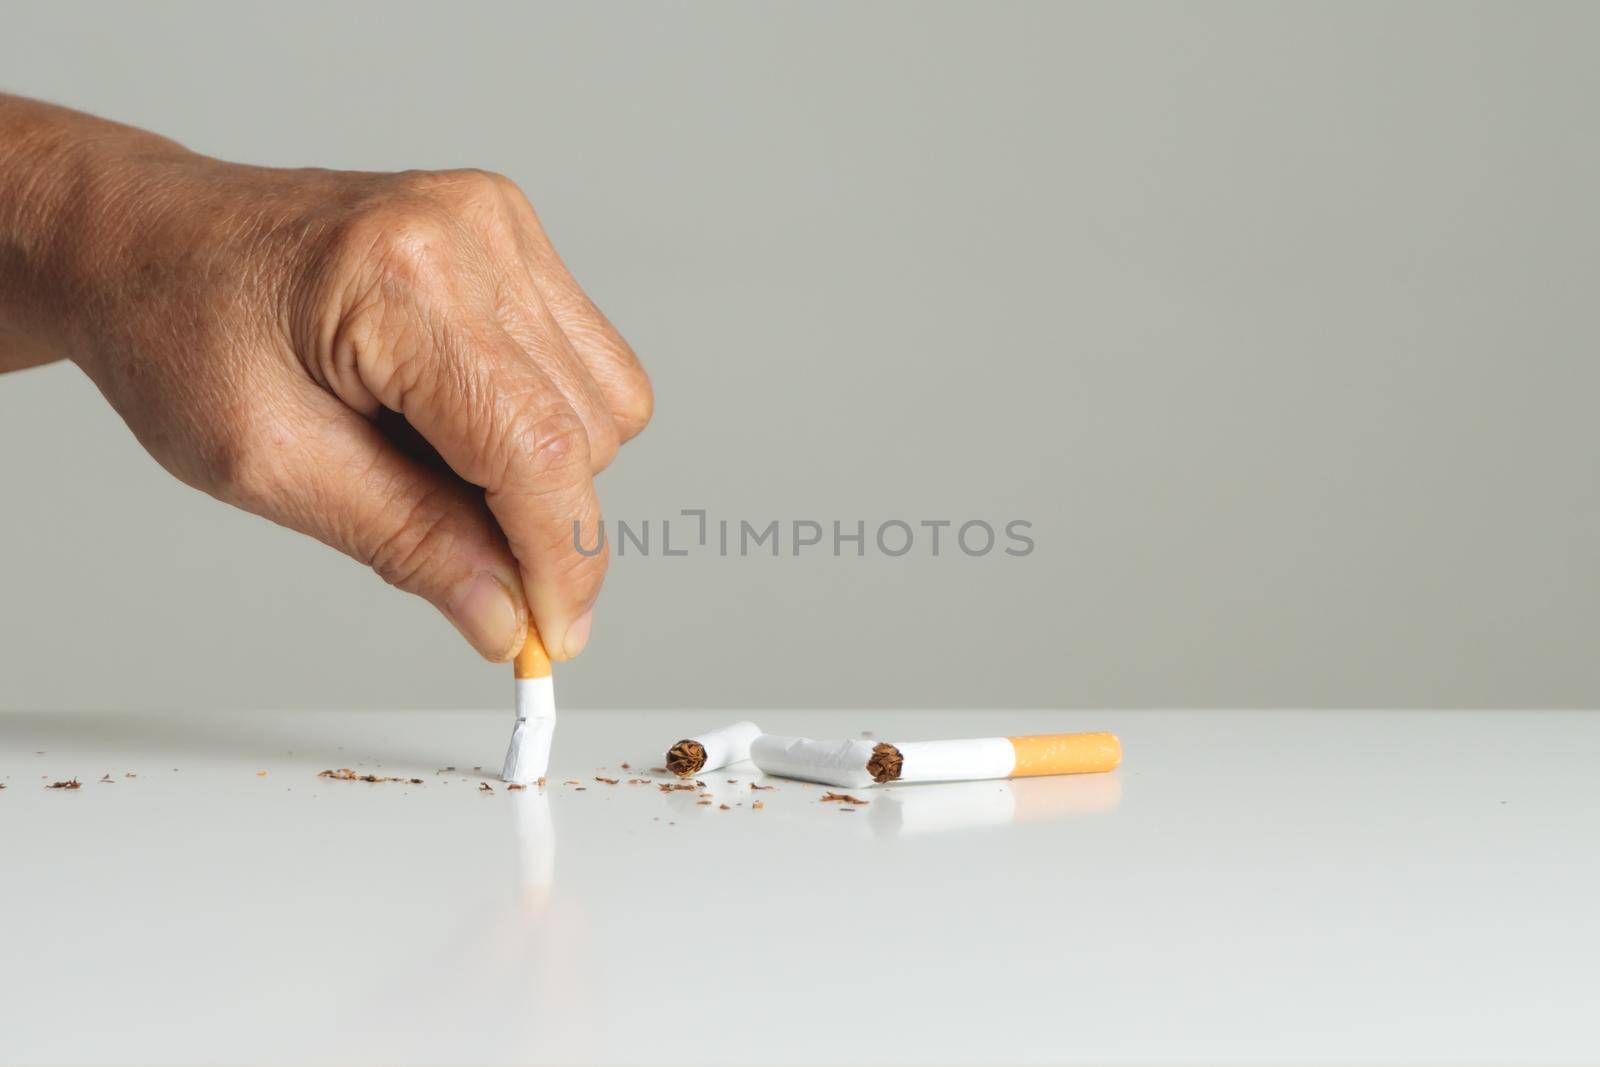 Quit smoking, no tobacco day, mother hands breaking the cigarette by psodaz